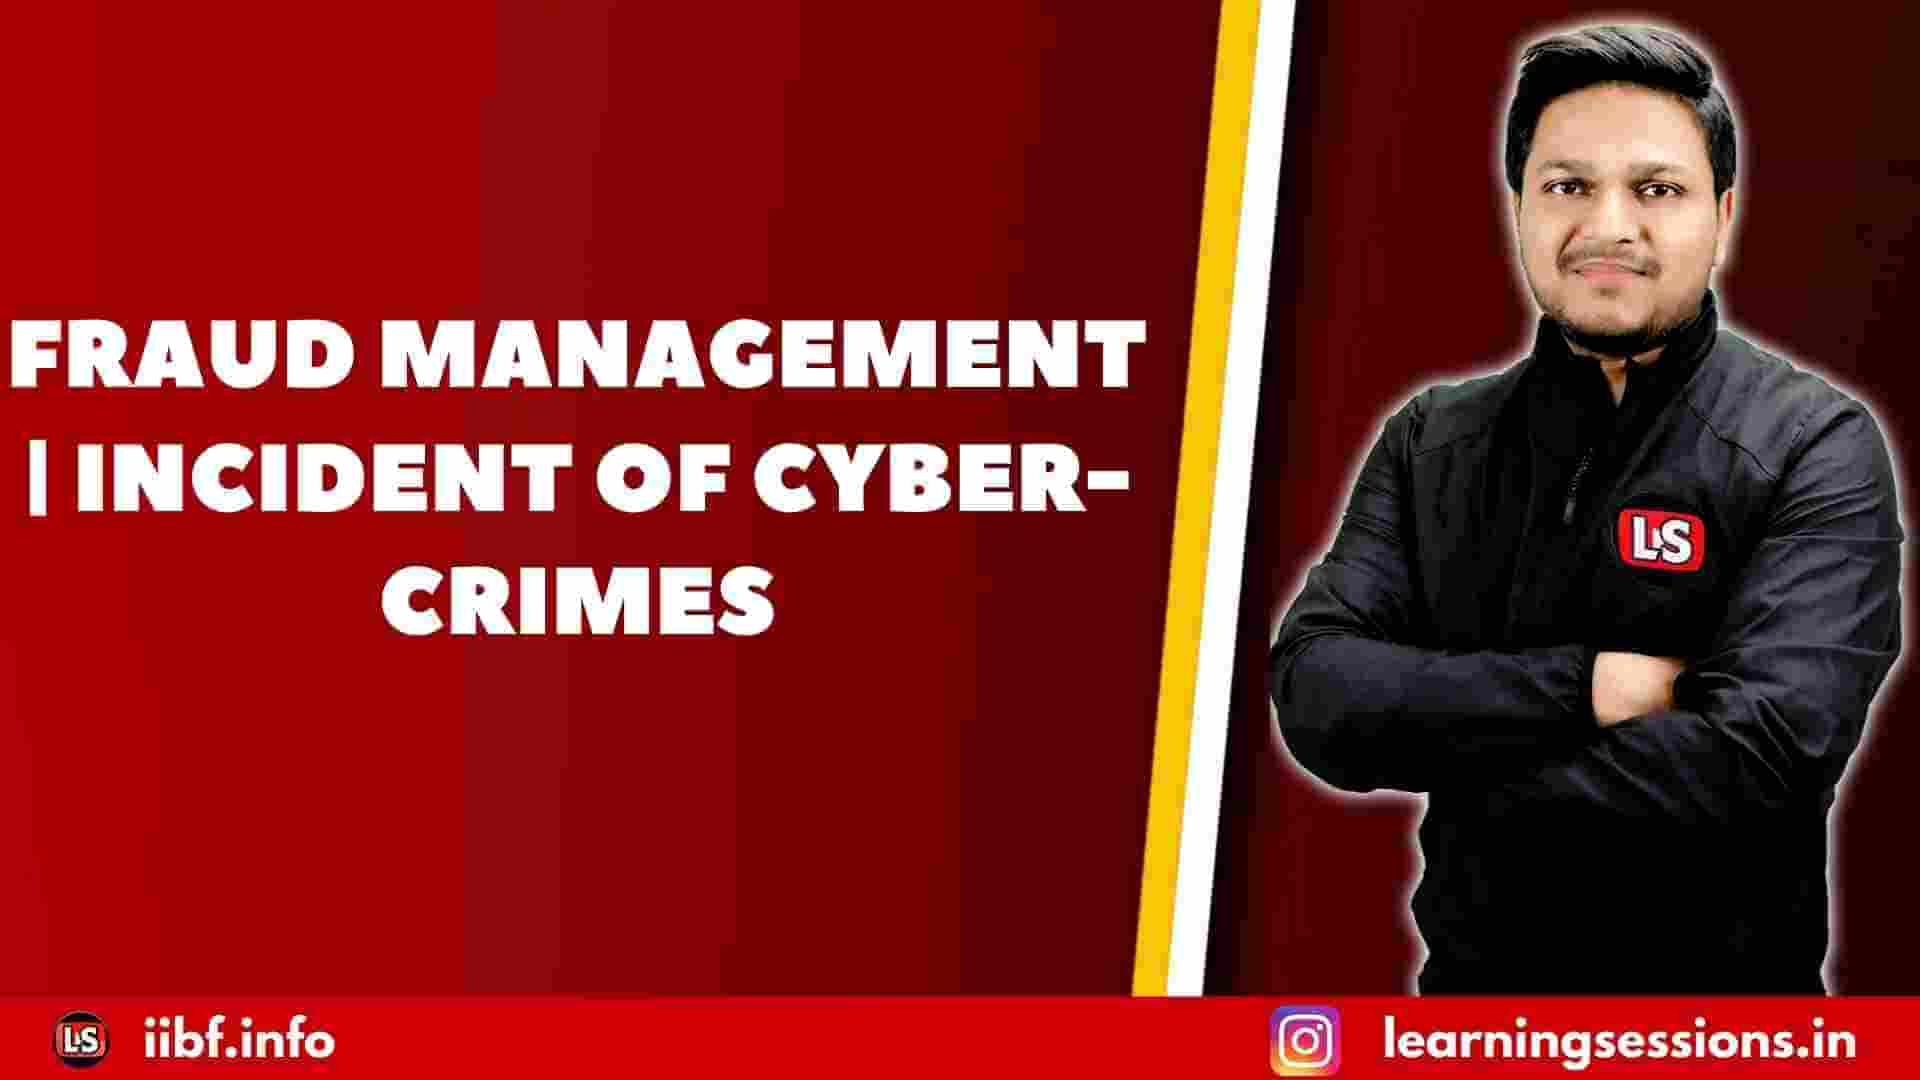 FRAUD MANAGEMENT | INCIDENT OF CYBER-CRIMES